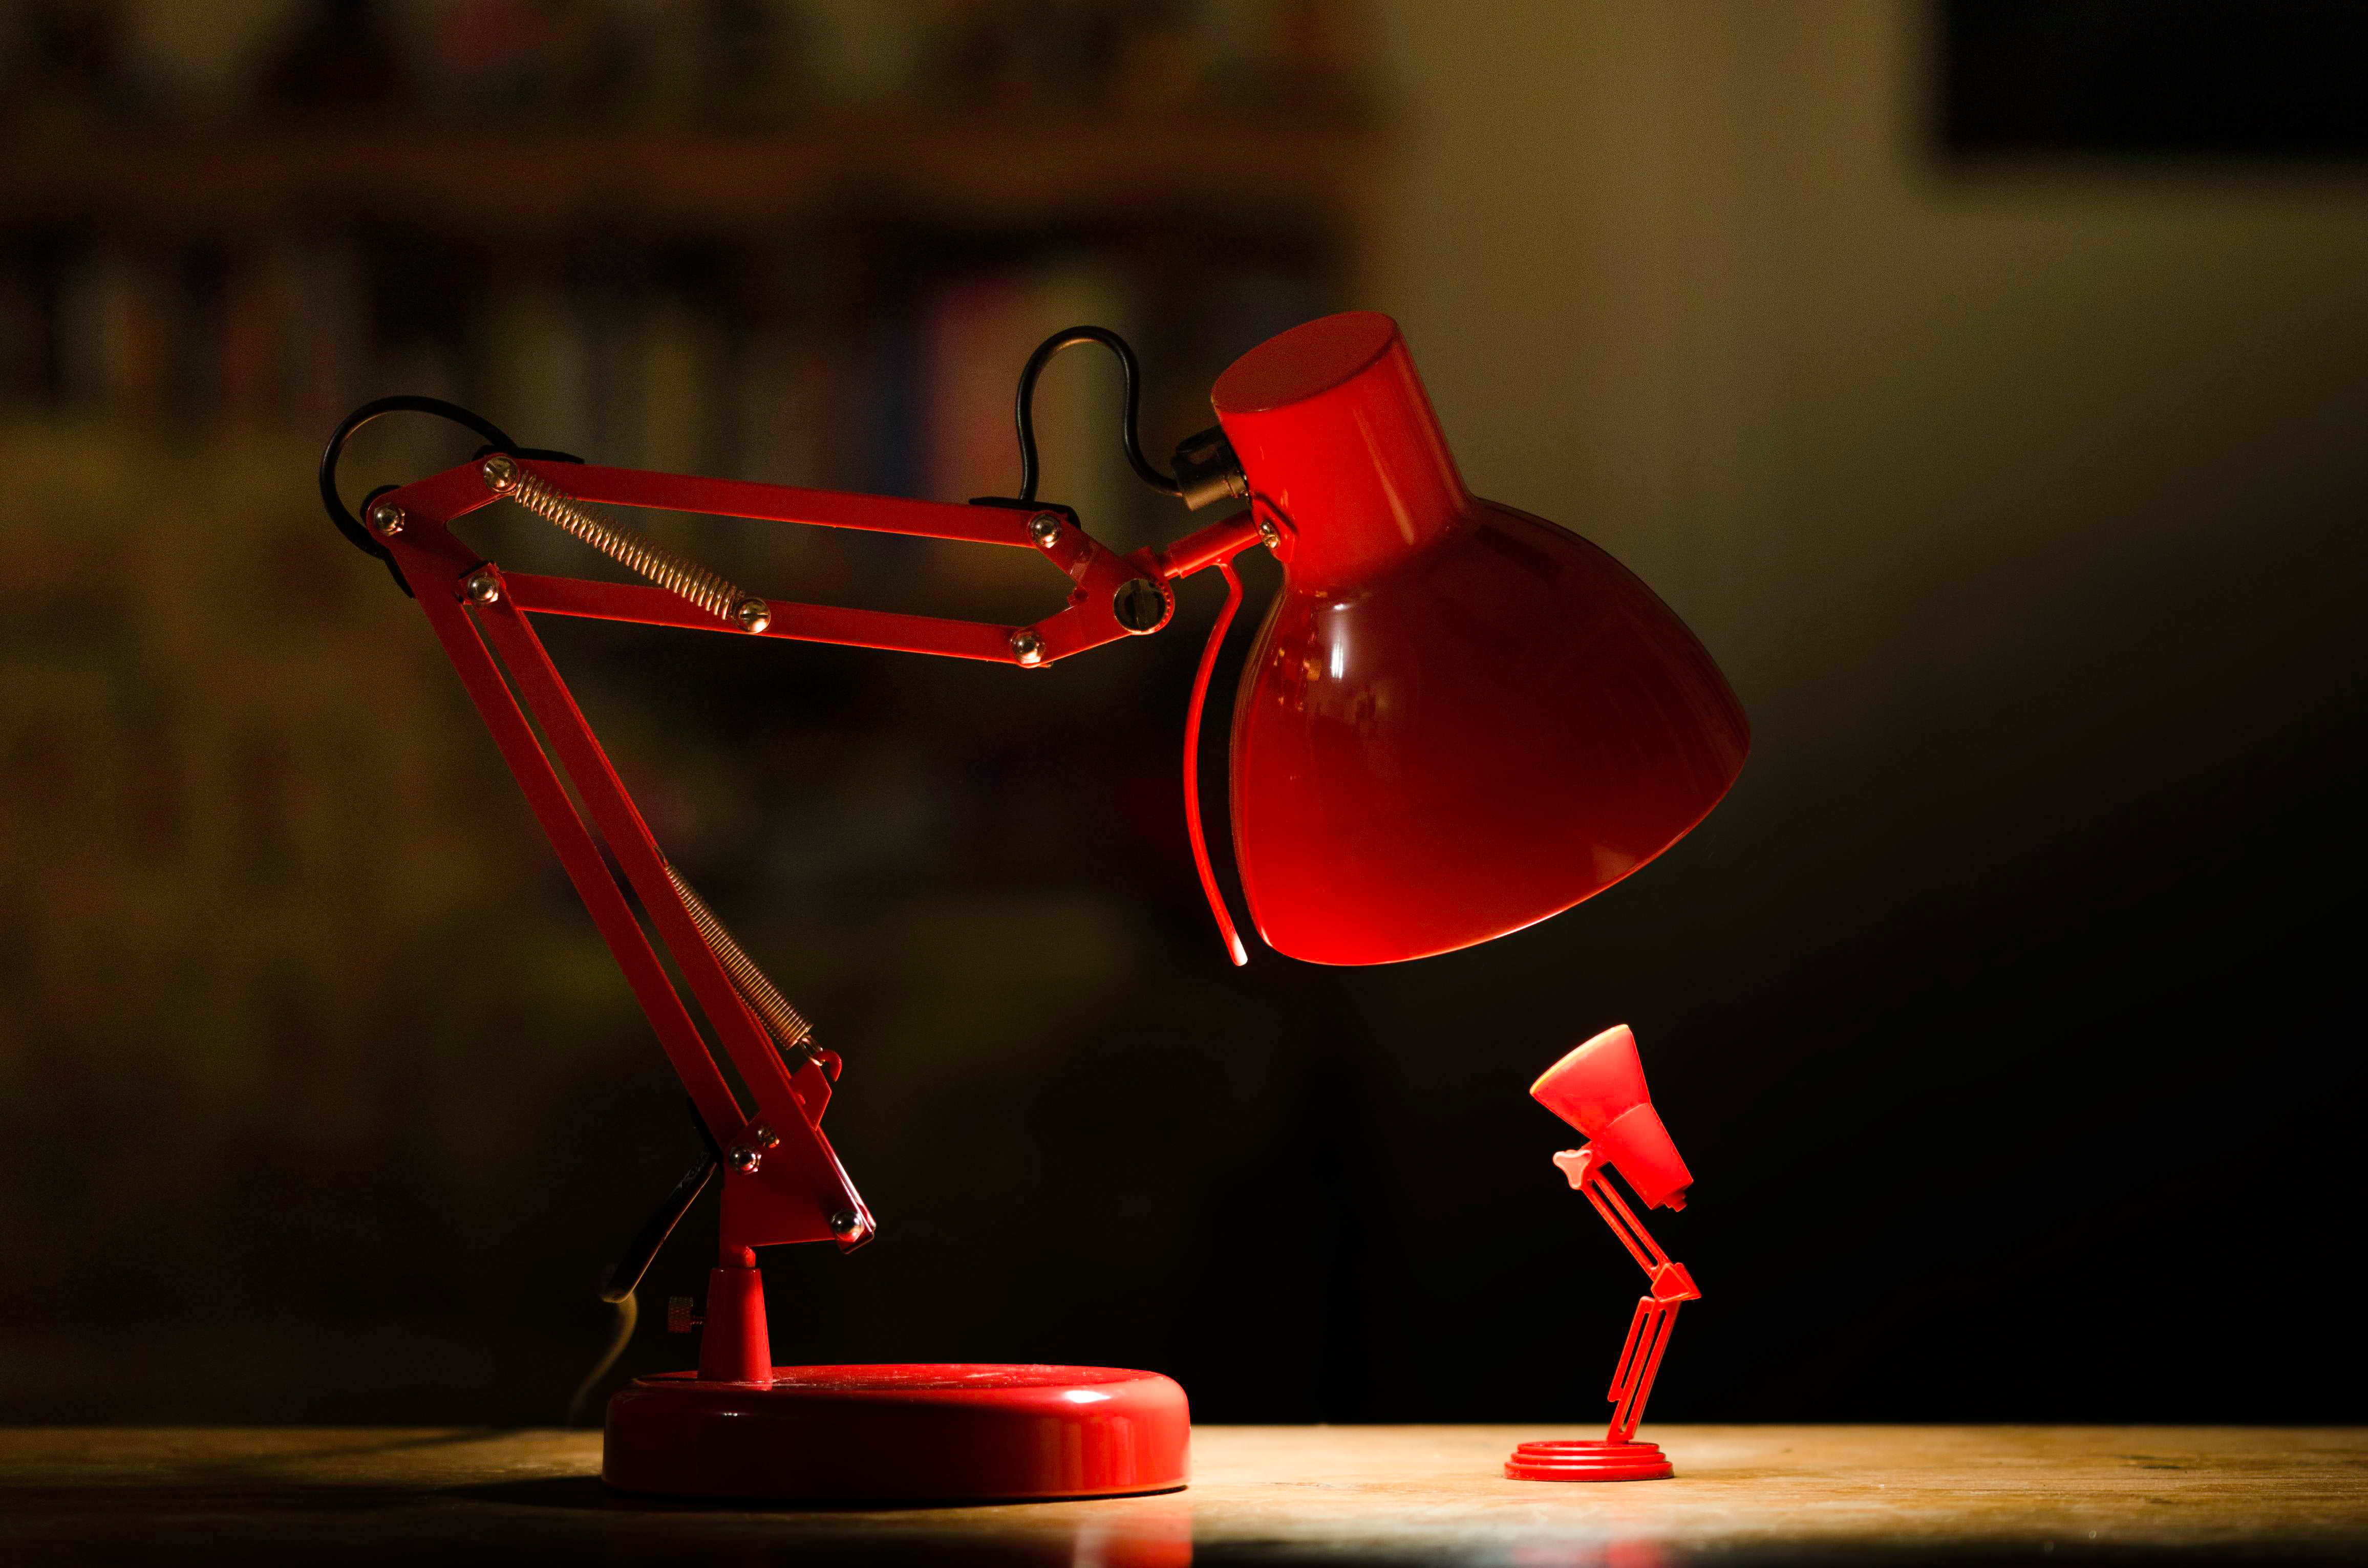 Red Desk Lamp Lighted On Top Of Brown Wooden Surface Hd Wallpaper